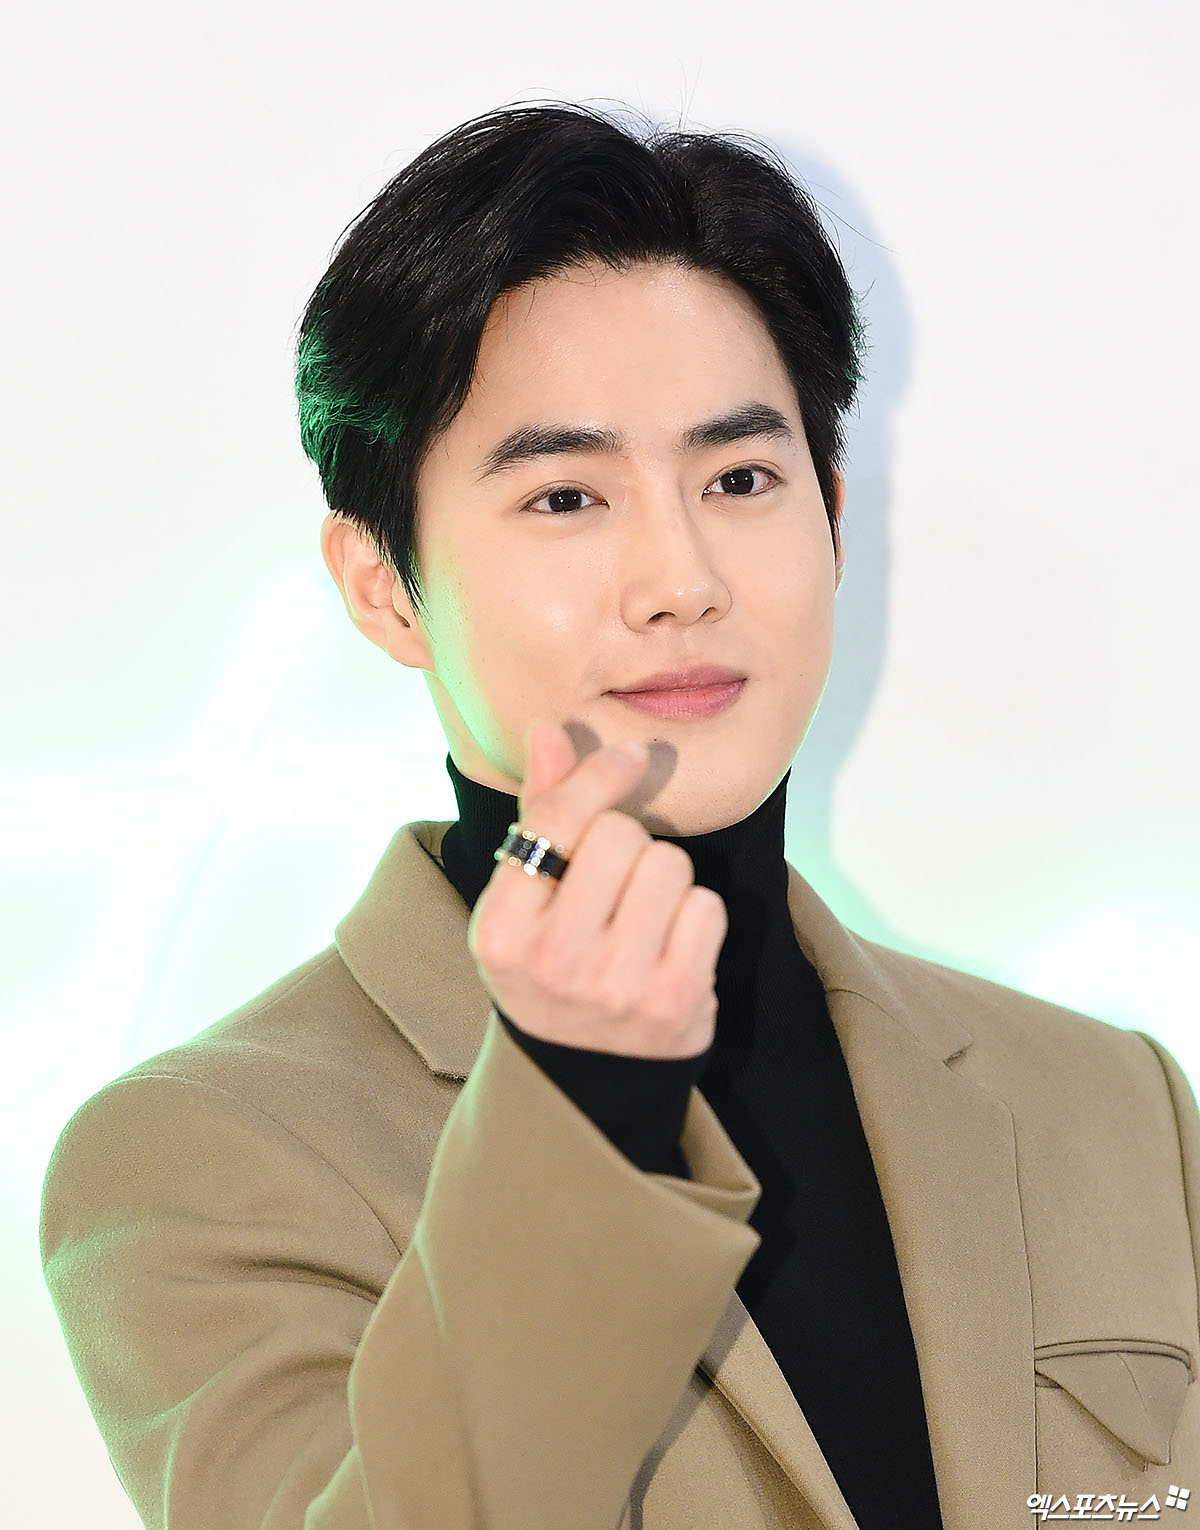 EXO Suho, who attended the opening event of the Bottega Veneta Pouch Pop-up Store held at the Hyodai Department Store Pangyo branch in Baekhyun-dong, Gyeonggi Province, on the afternoon of the 6th, has photo time.